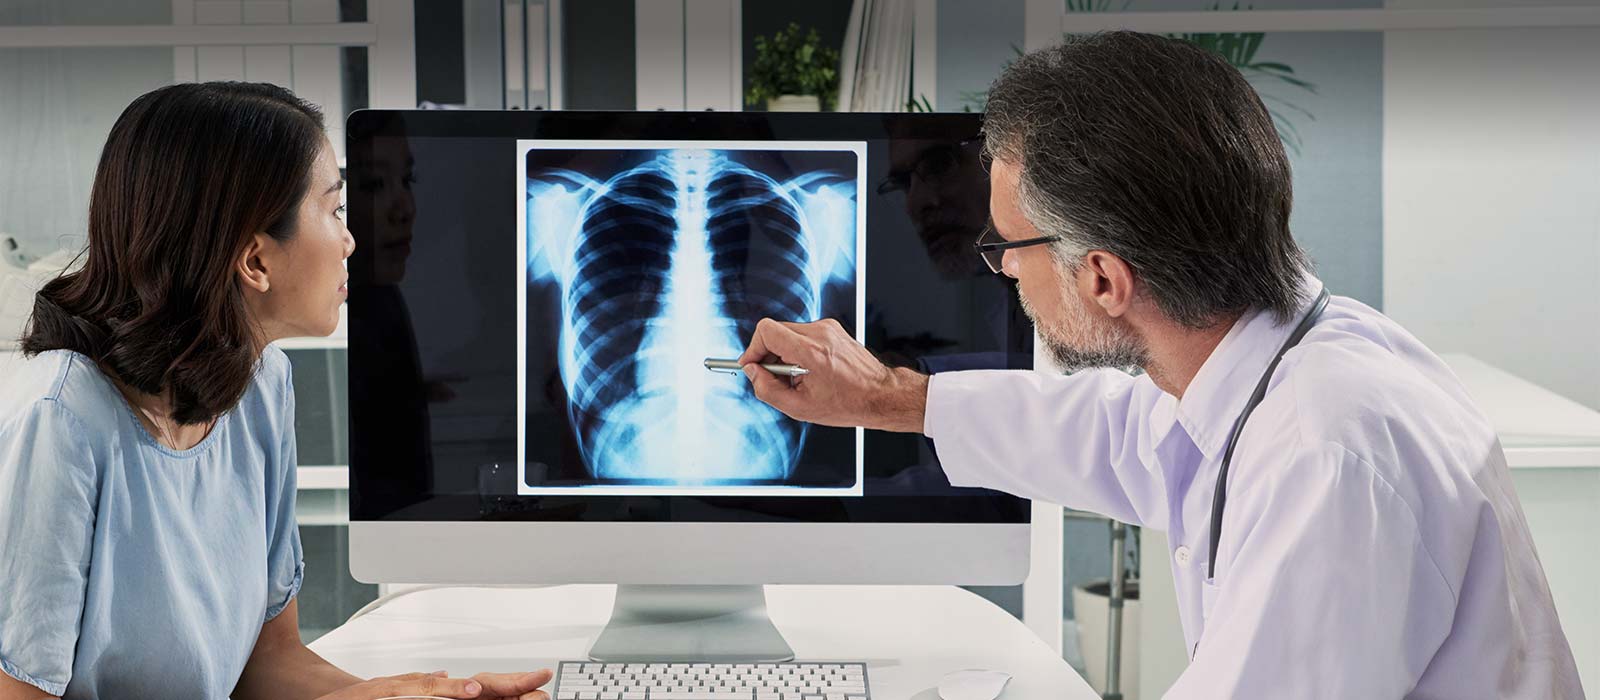 Doctor and patient reviewing x-ray image